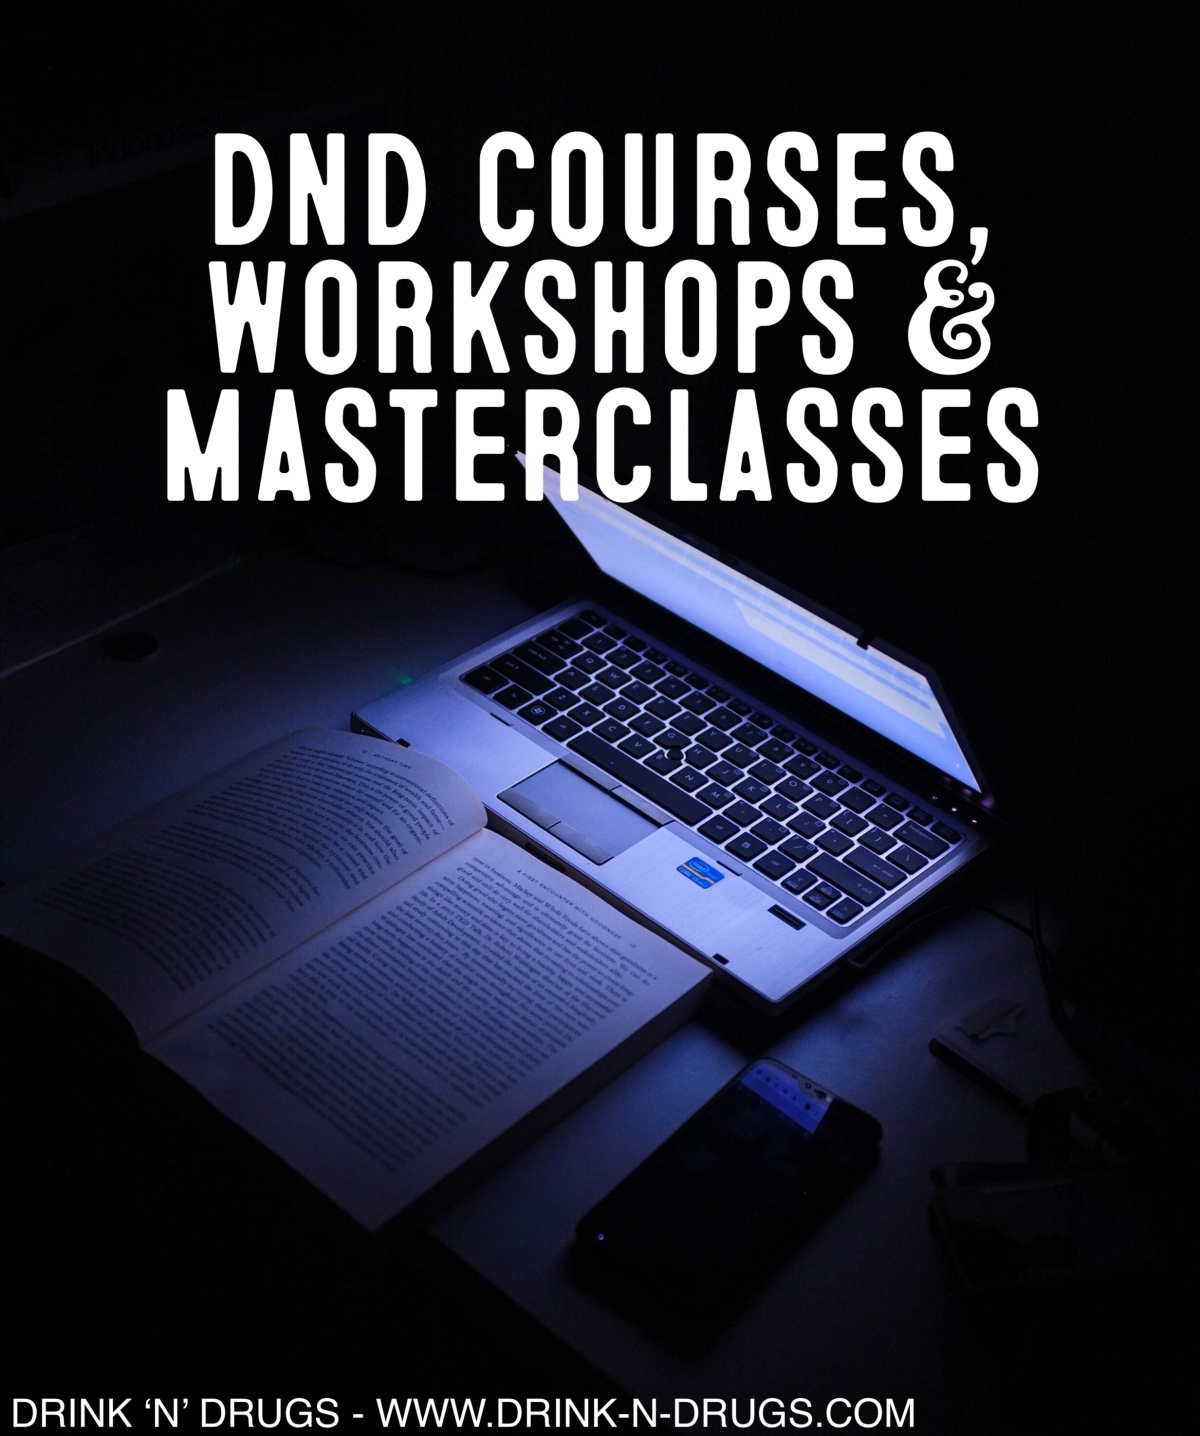 DnD Courses, Workshops And Masterclasses Coming In Jan 2022